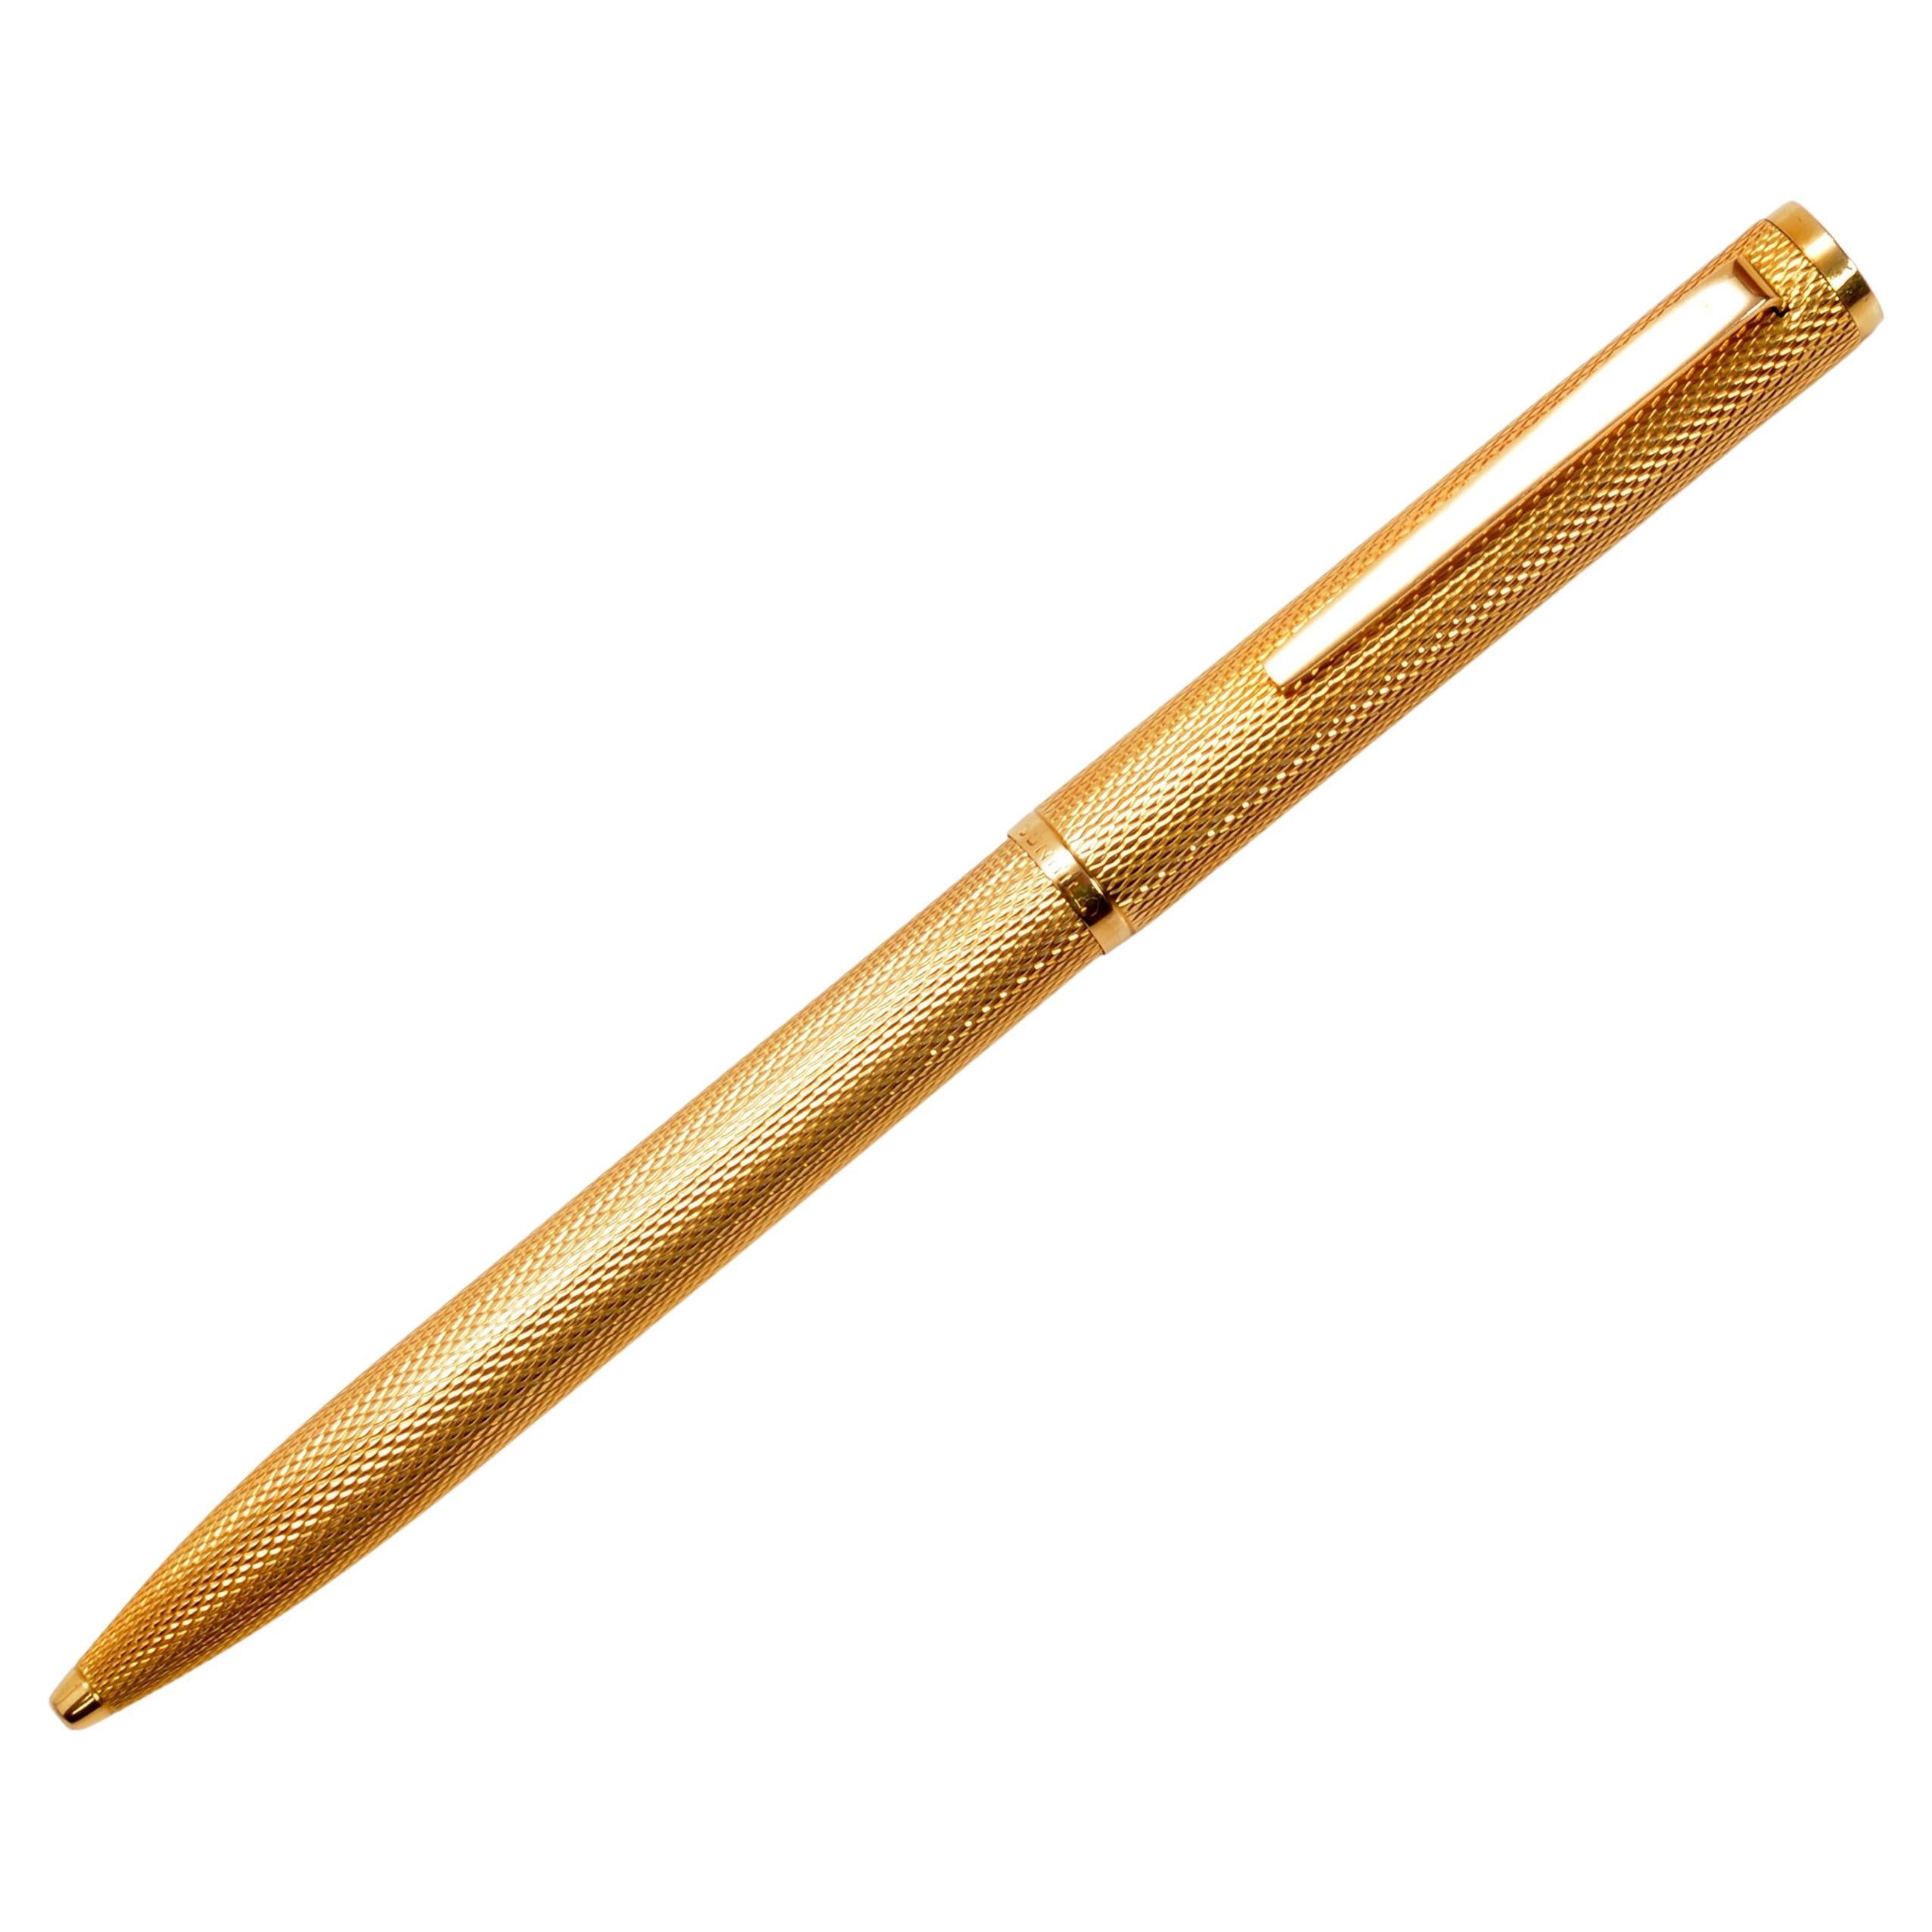 Solid 18kt Yellow Gold Dunhill Ballpoint Pen, with French Hallmarks